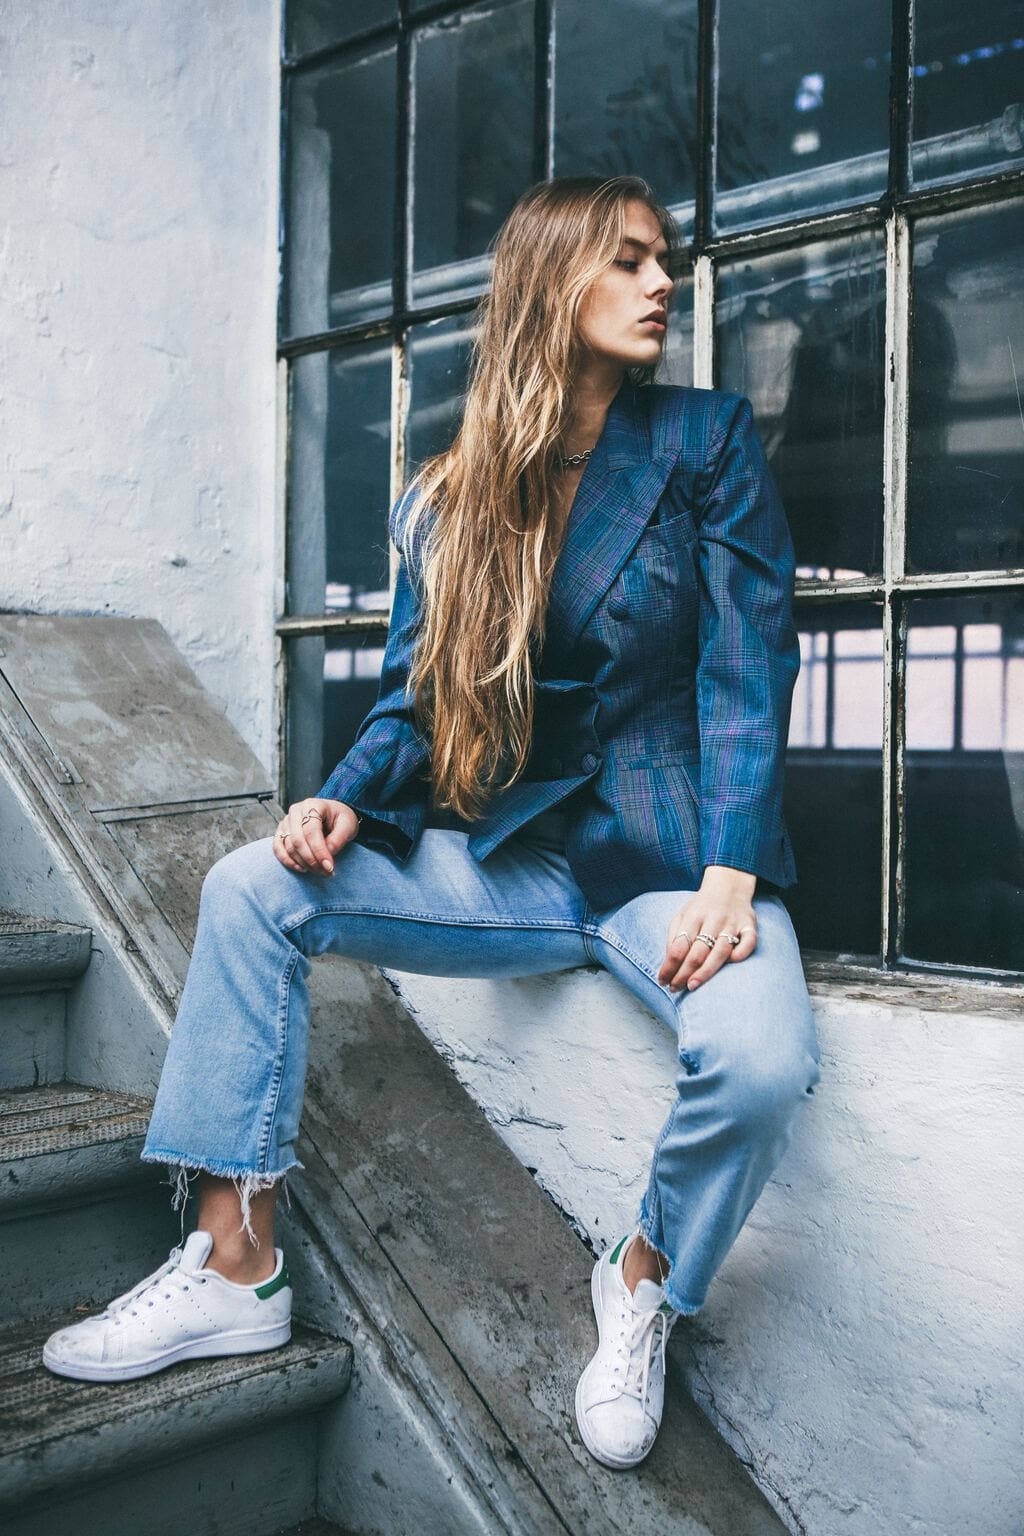 Fall Denim Trends 2019 Guide: The Hottest Trends & How to Style Them